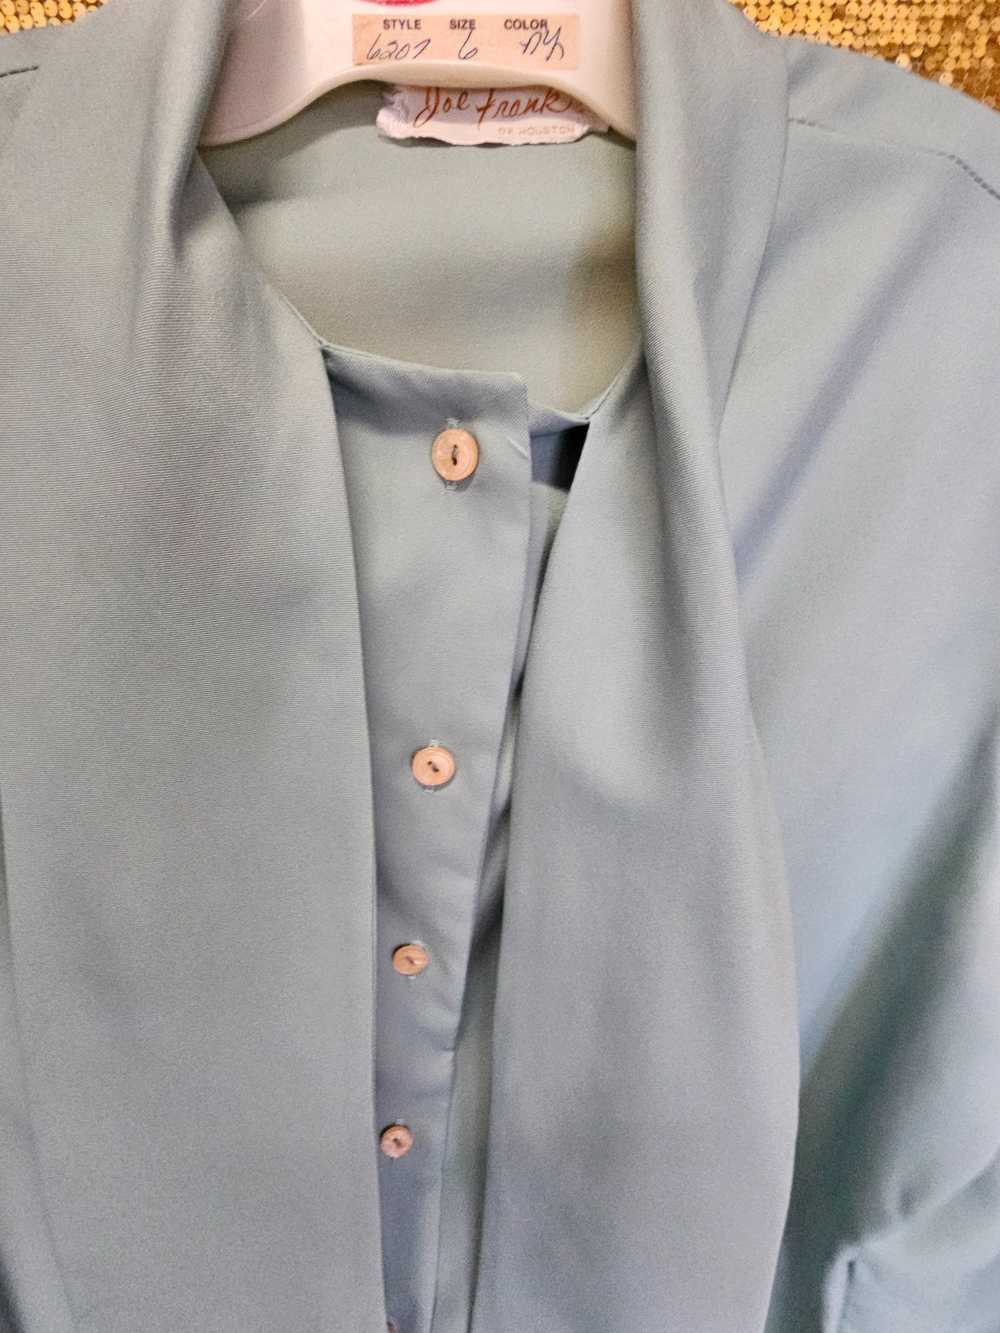 Other Vintage Joe Frank Button Down Top - image 3